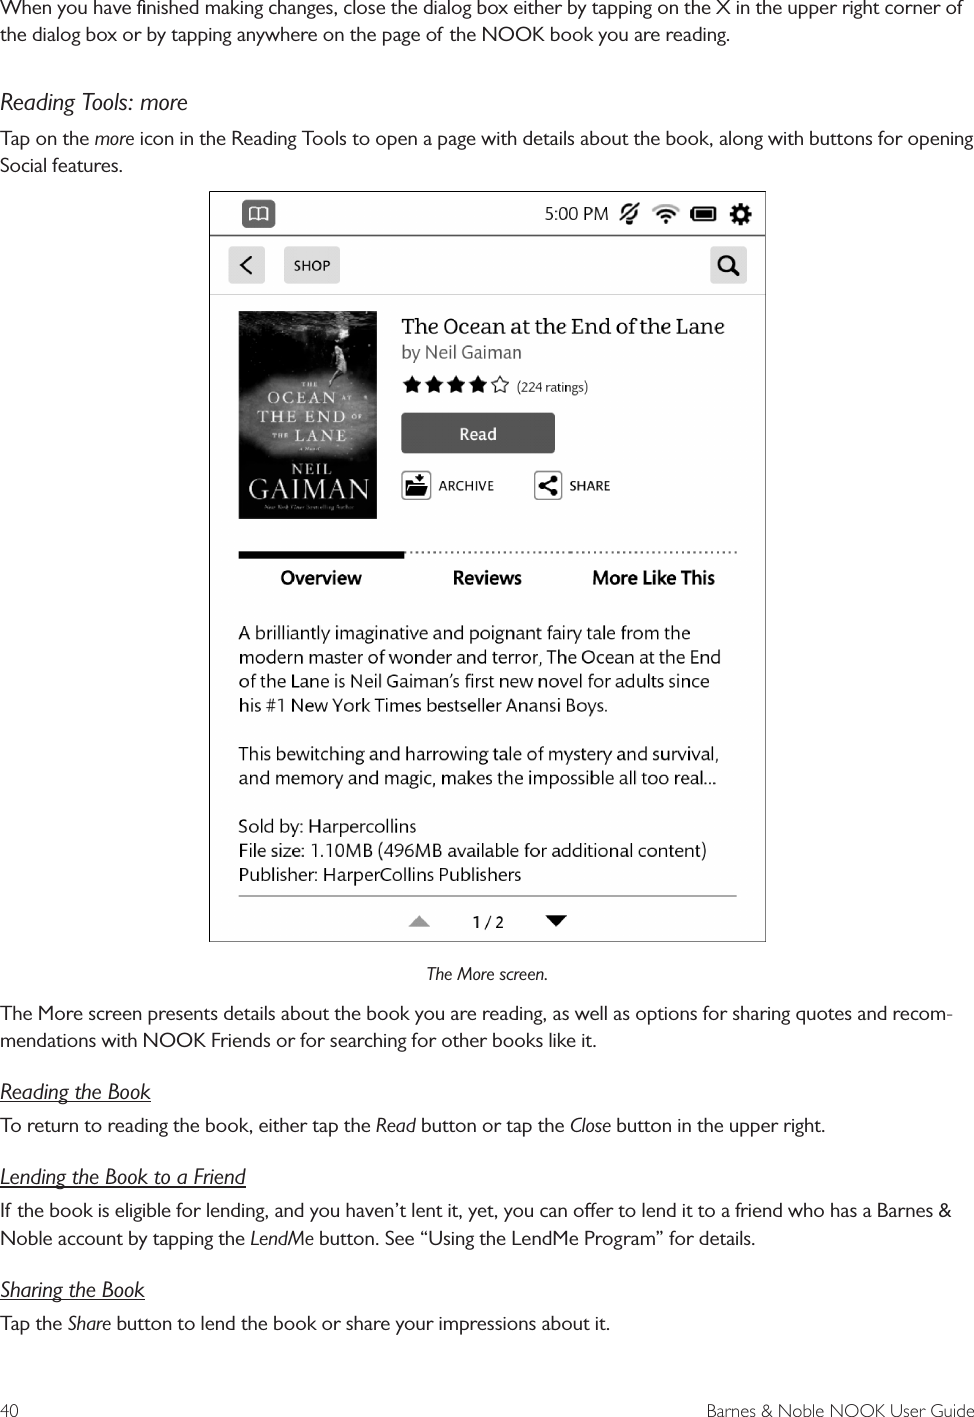 40  Barnes &amp; Noble NOOK User GuideWhen you have ﬁnished making changes, close the dialog box either by tapping on the X in the upper right corner of the dialog box or by tapping anywhere on the page of the NOOK book you are reading.Reading Tools: moreTap on the more icon in the Reading Tools to open a page with details about the book, along with buttons for opening Social features.The More screen.The More screen presents details about the book you are reading, as well as options for sharing quotes and recom-mendations with NOOK Friends or for searching for other books like it. Reading the BookTo return to reading the book, either tap the Read button or tap the Close button in the upper right. Lending the Book to a FriendIf the book is eligible for lending, and you haven’t lent it, yet, you can oer to lend it to a friend who has a Barnes &amp; Noble account by tapping the LendMe button. See “Using the LendMe Program” for details.Sharing the BookTap the Share button to lend the book or share your impressions about it. 